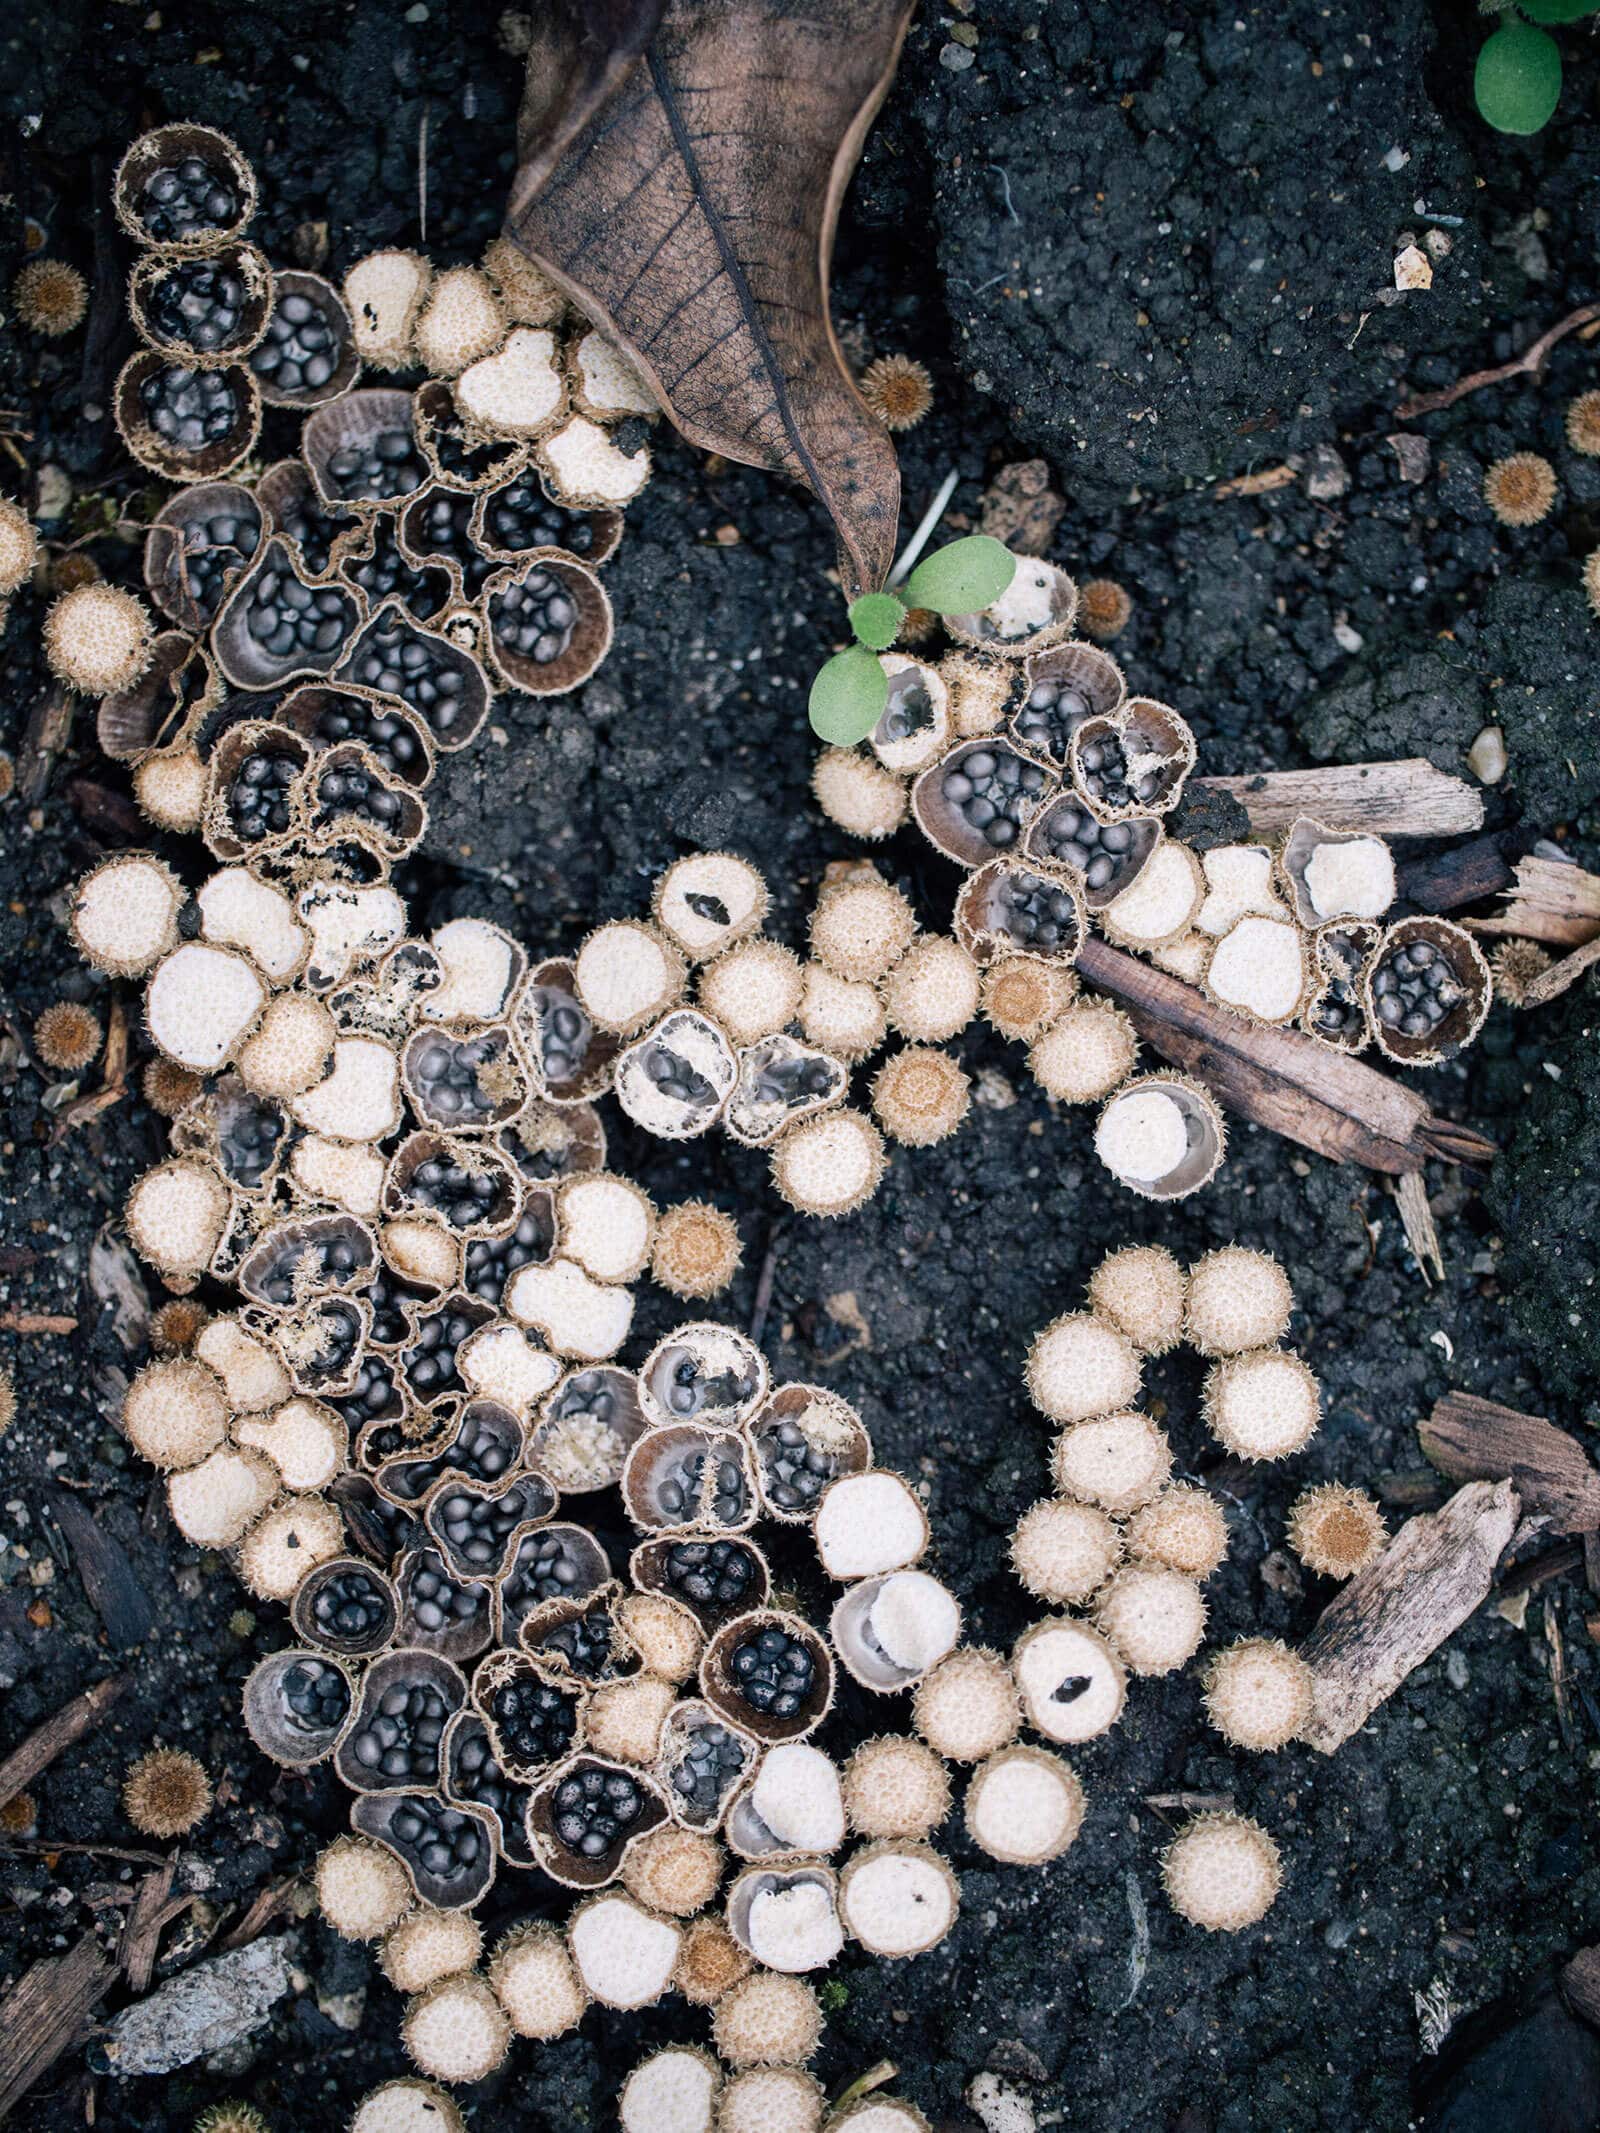 Bird's nest fungi growing in damp soil and wood mulch